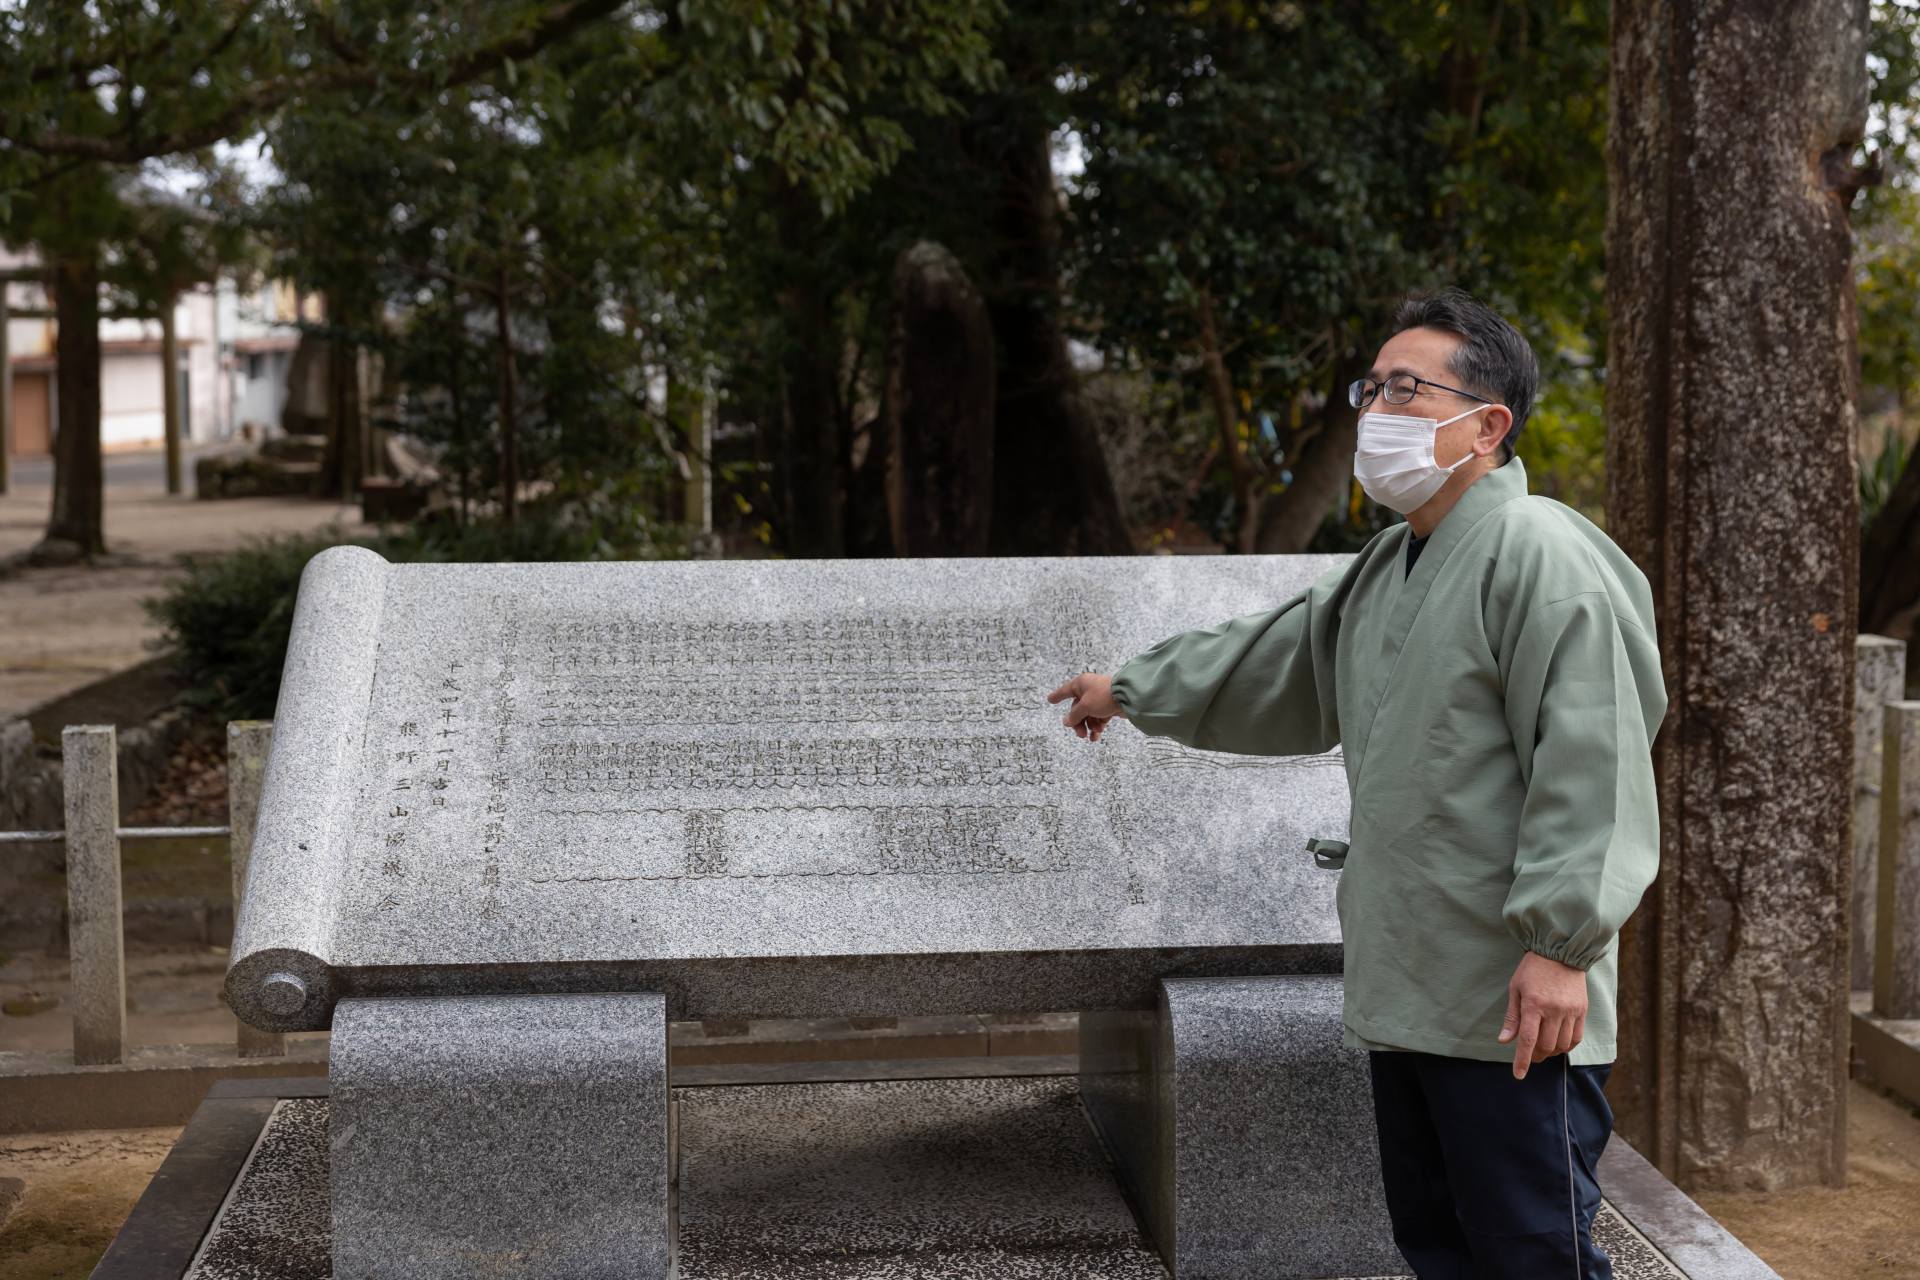 A stone monument inscribed with the names of 25 people who set out on the journey to Mt. Fudaraku